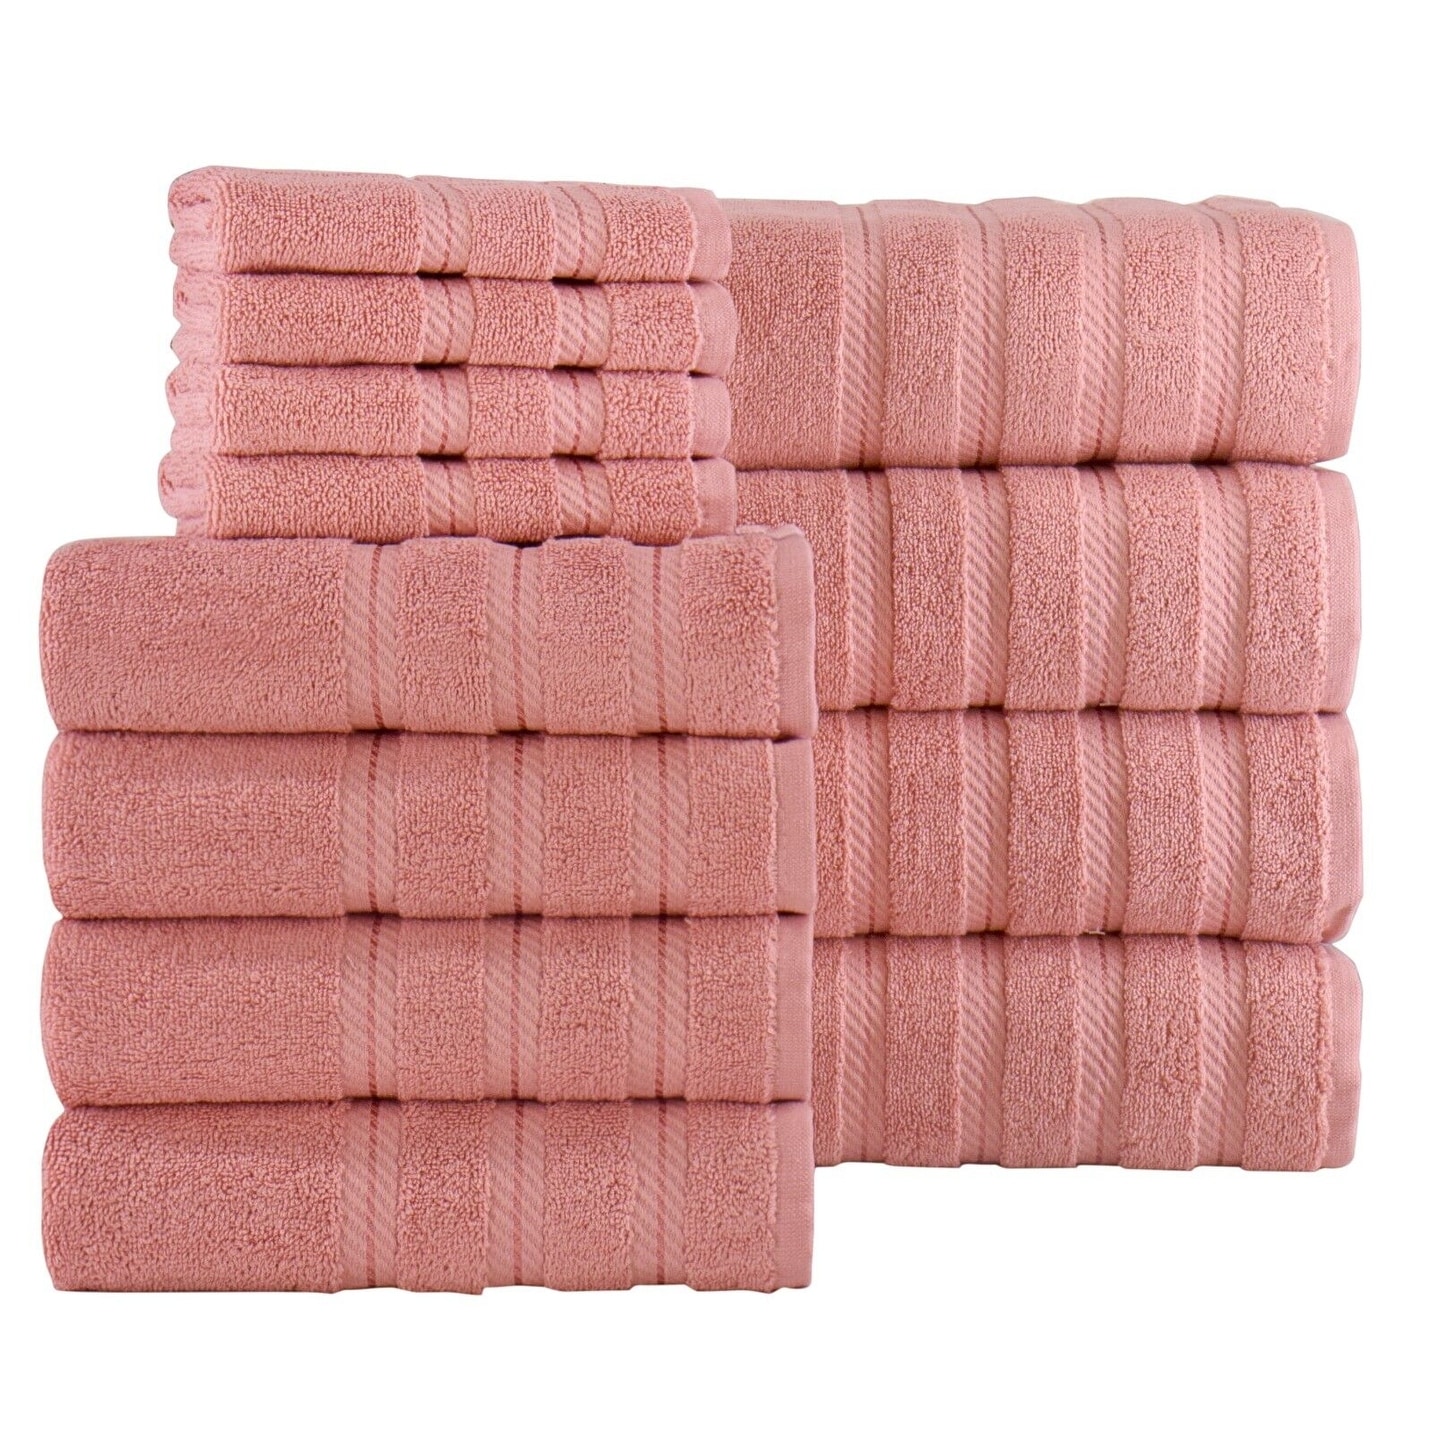 https://ak1.ostkcdn.com/images/products/is/images/direct/381760b95ef4a7f5b4ef195bb621a97070f7cd0b/Antalya-Hotel-Collection-Turkish-Cotton-Bathroom-Towel-12-Pc-Family-Set.jpg